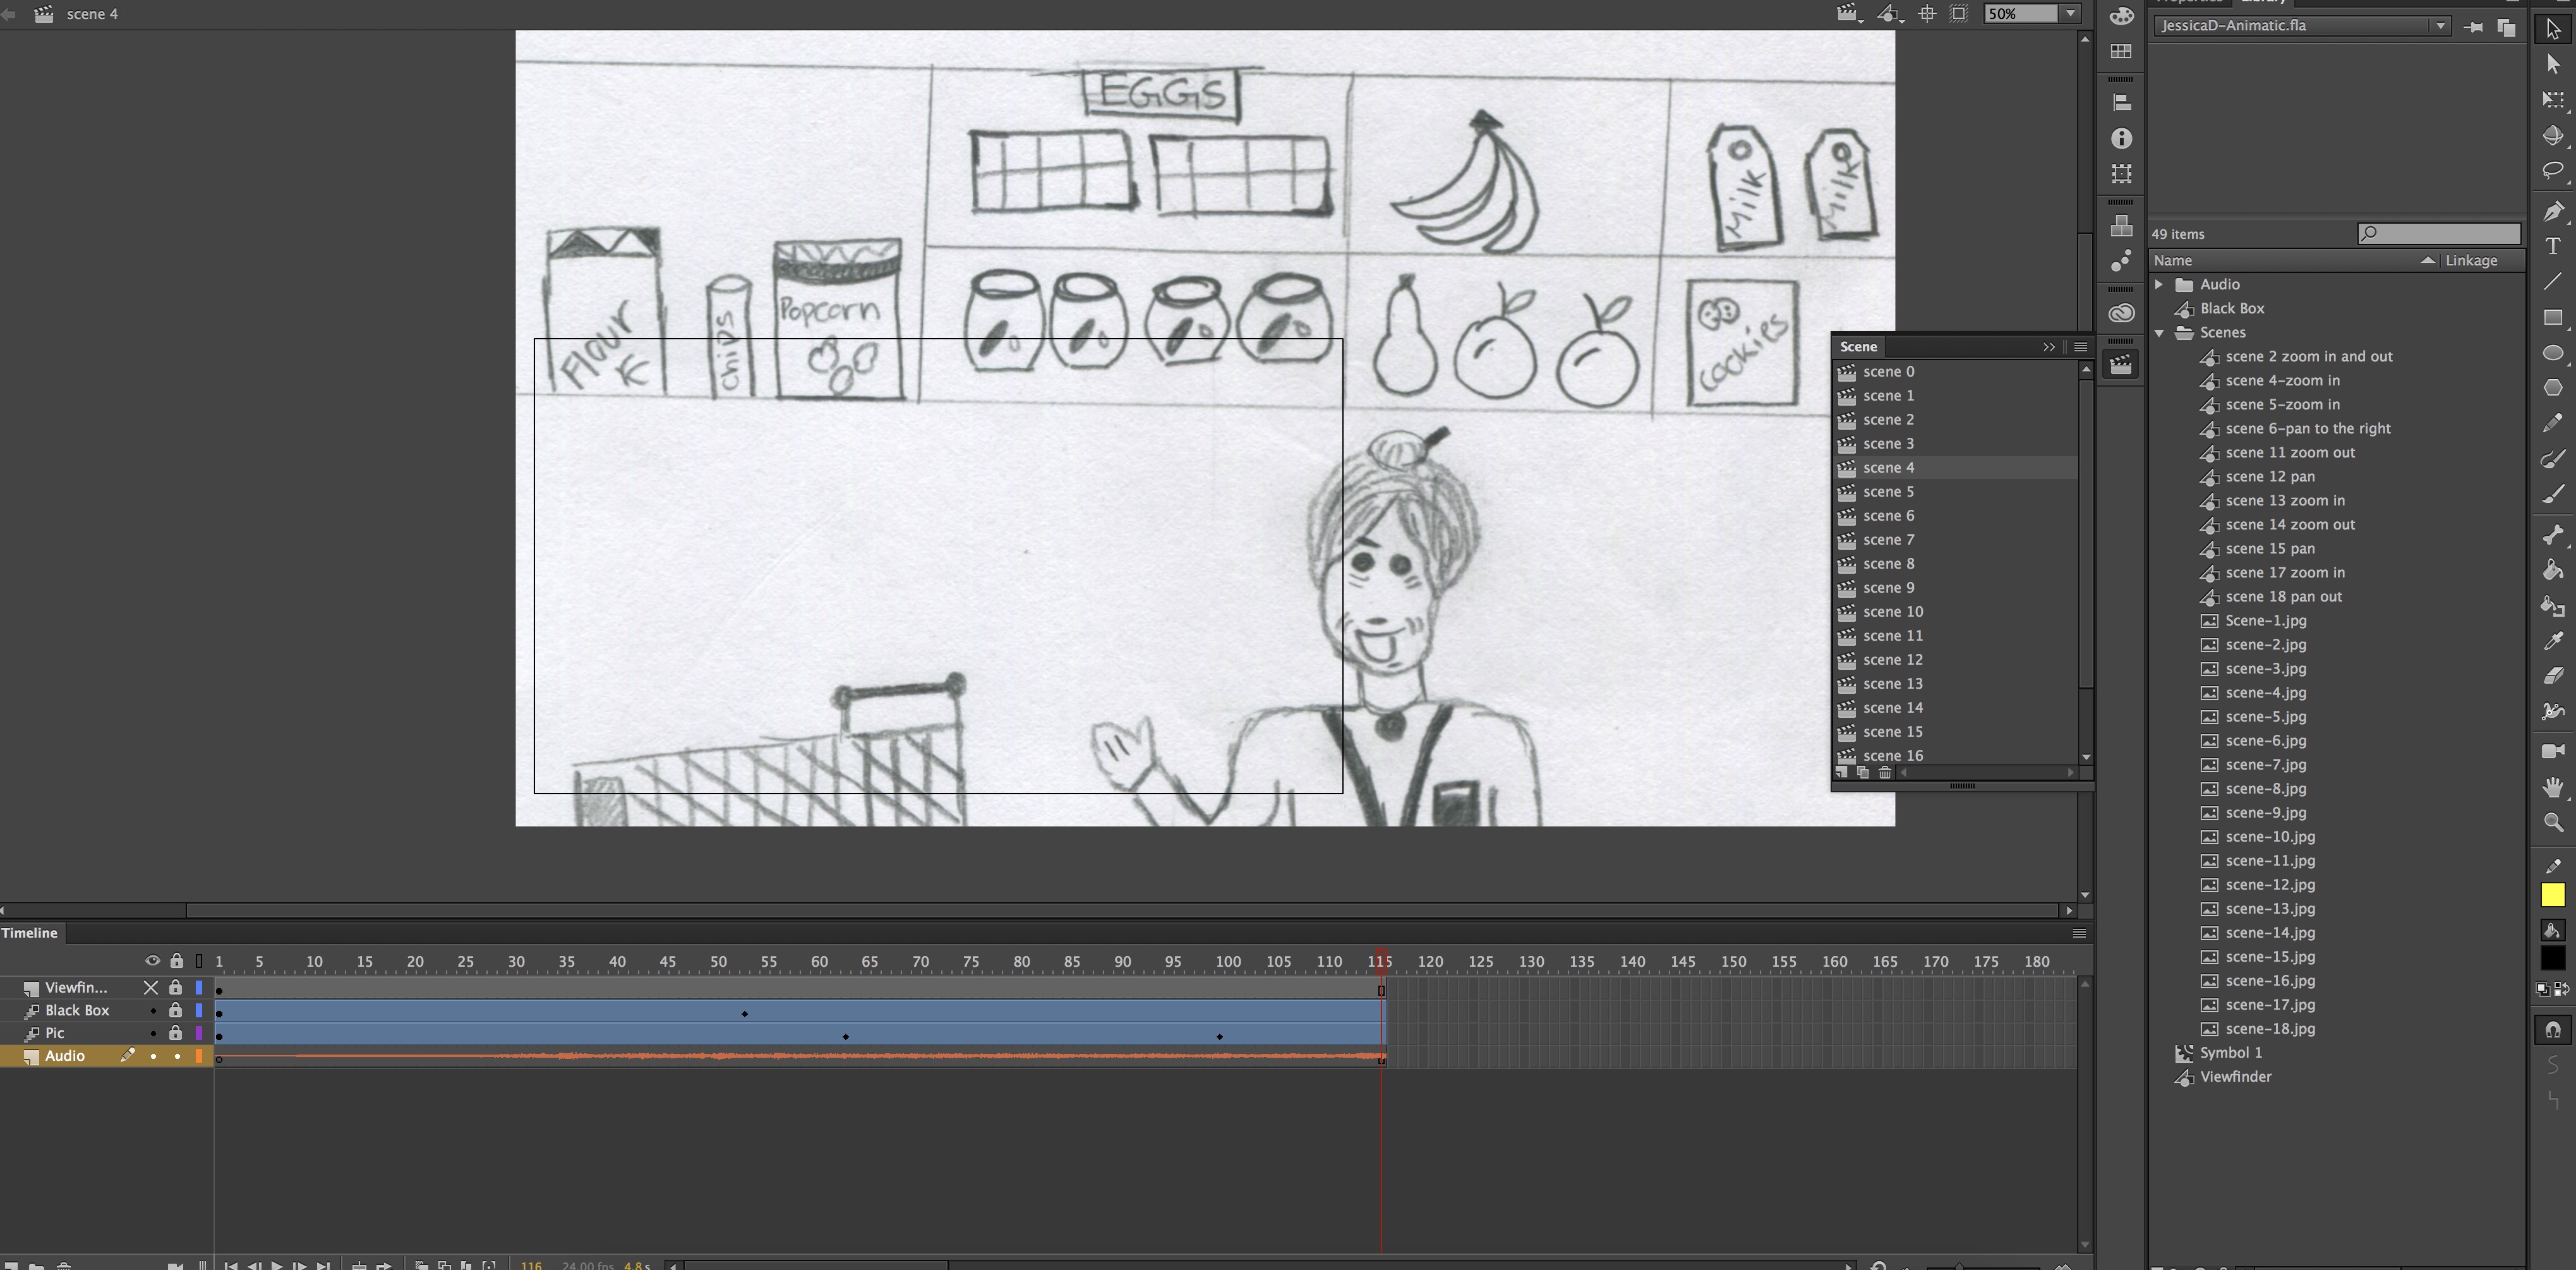 This is a screenshot of my rough cut animatic in Animate.